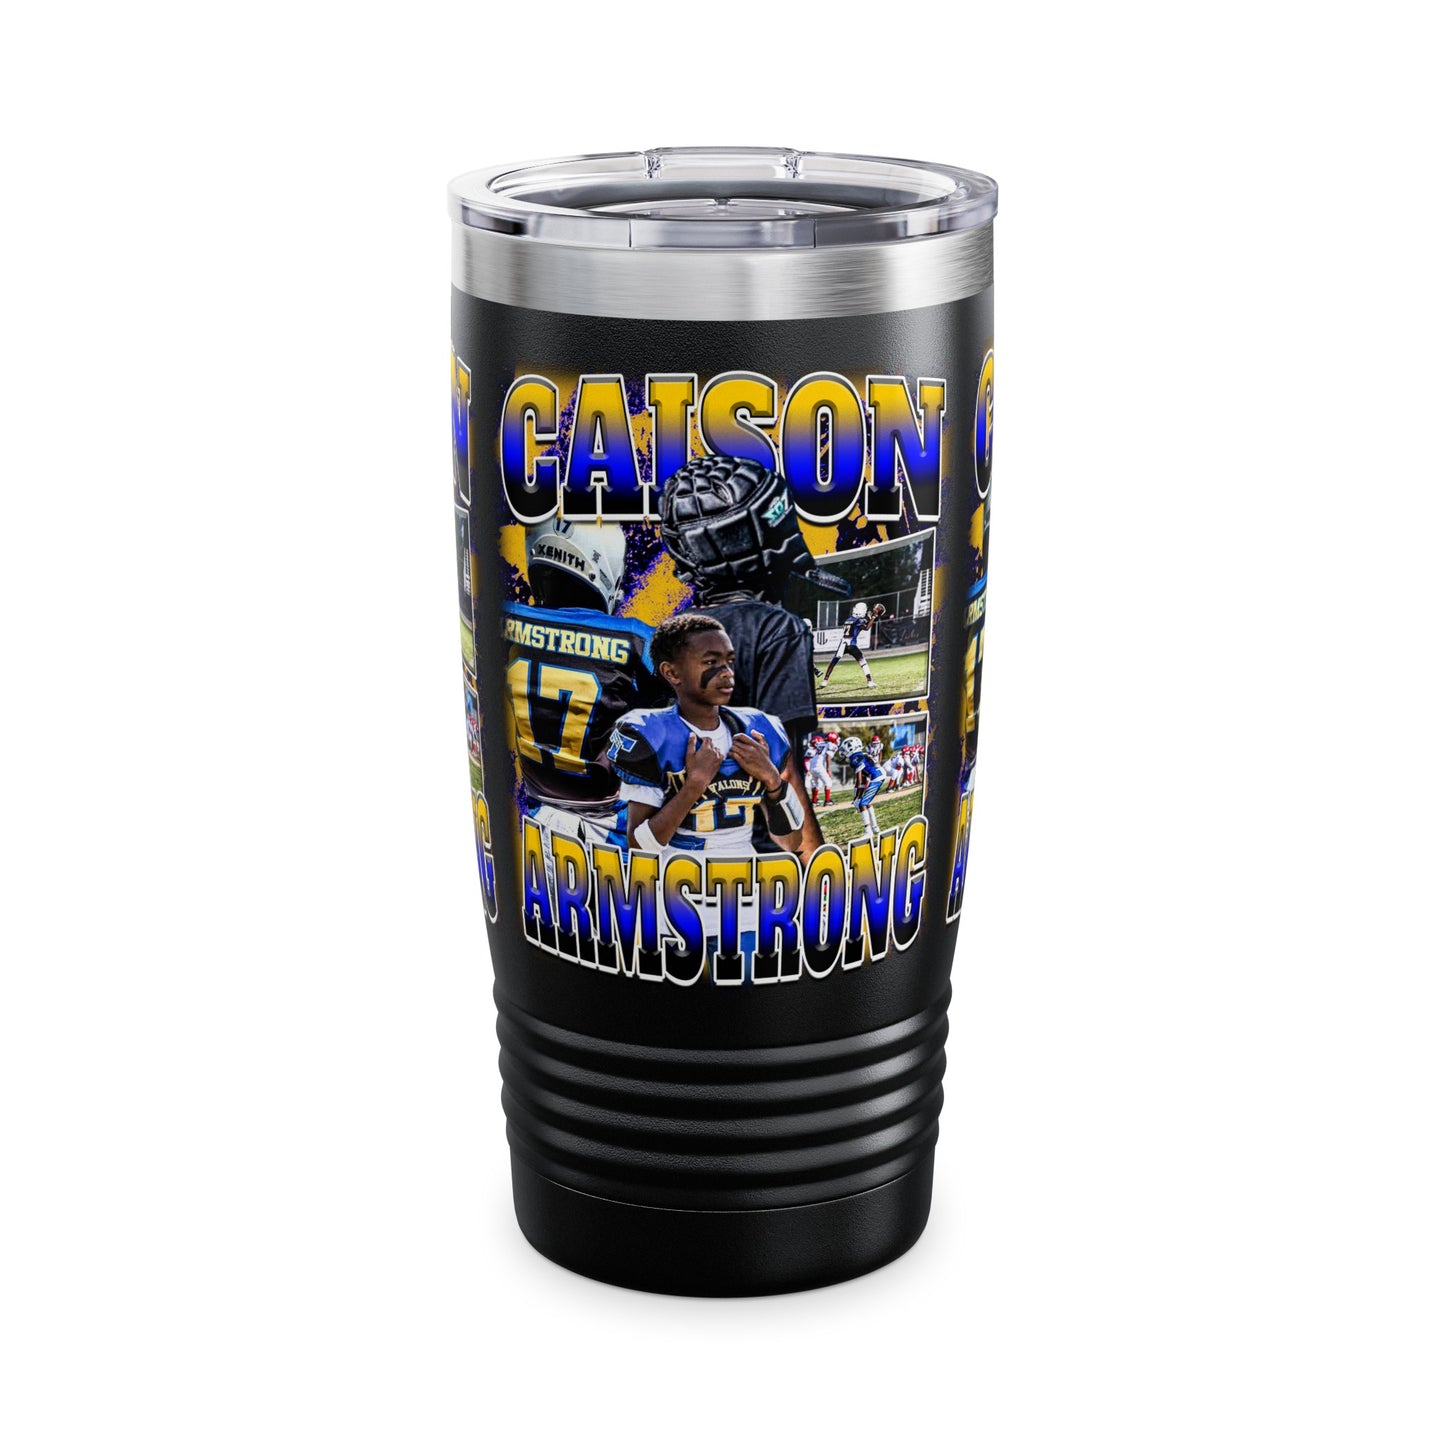 Caison Armstrong Stainless Steal Tumbler